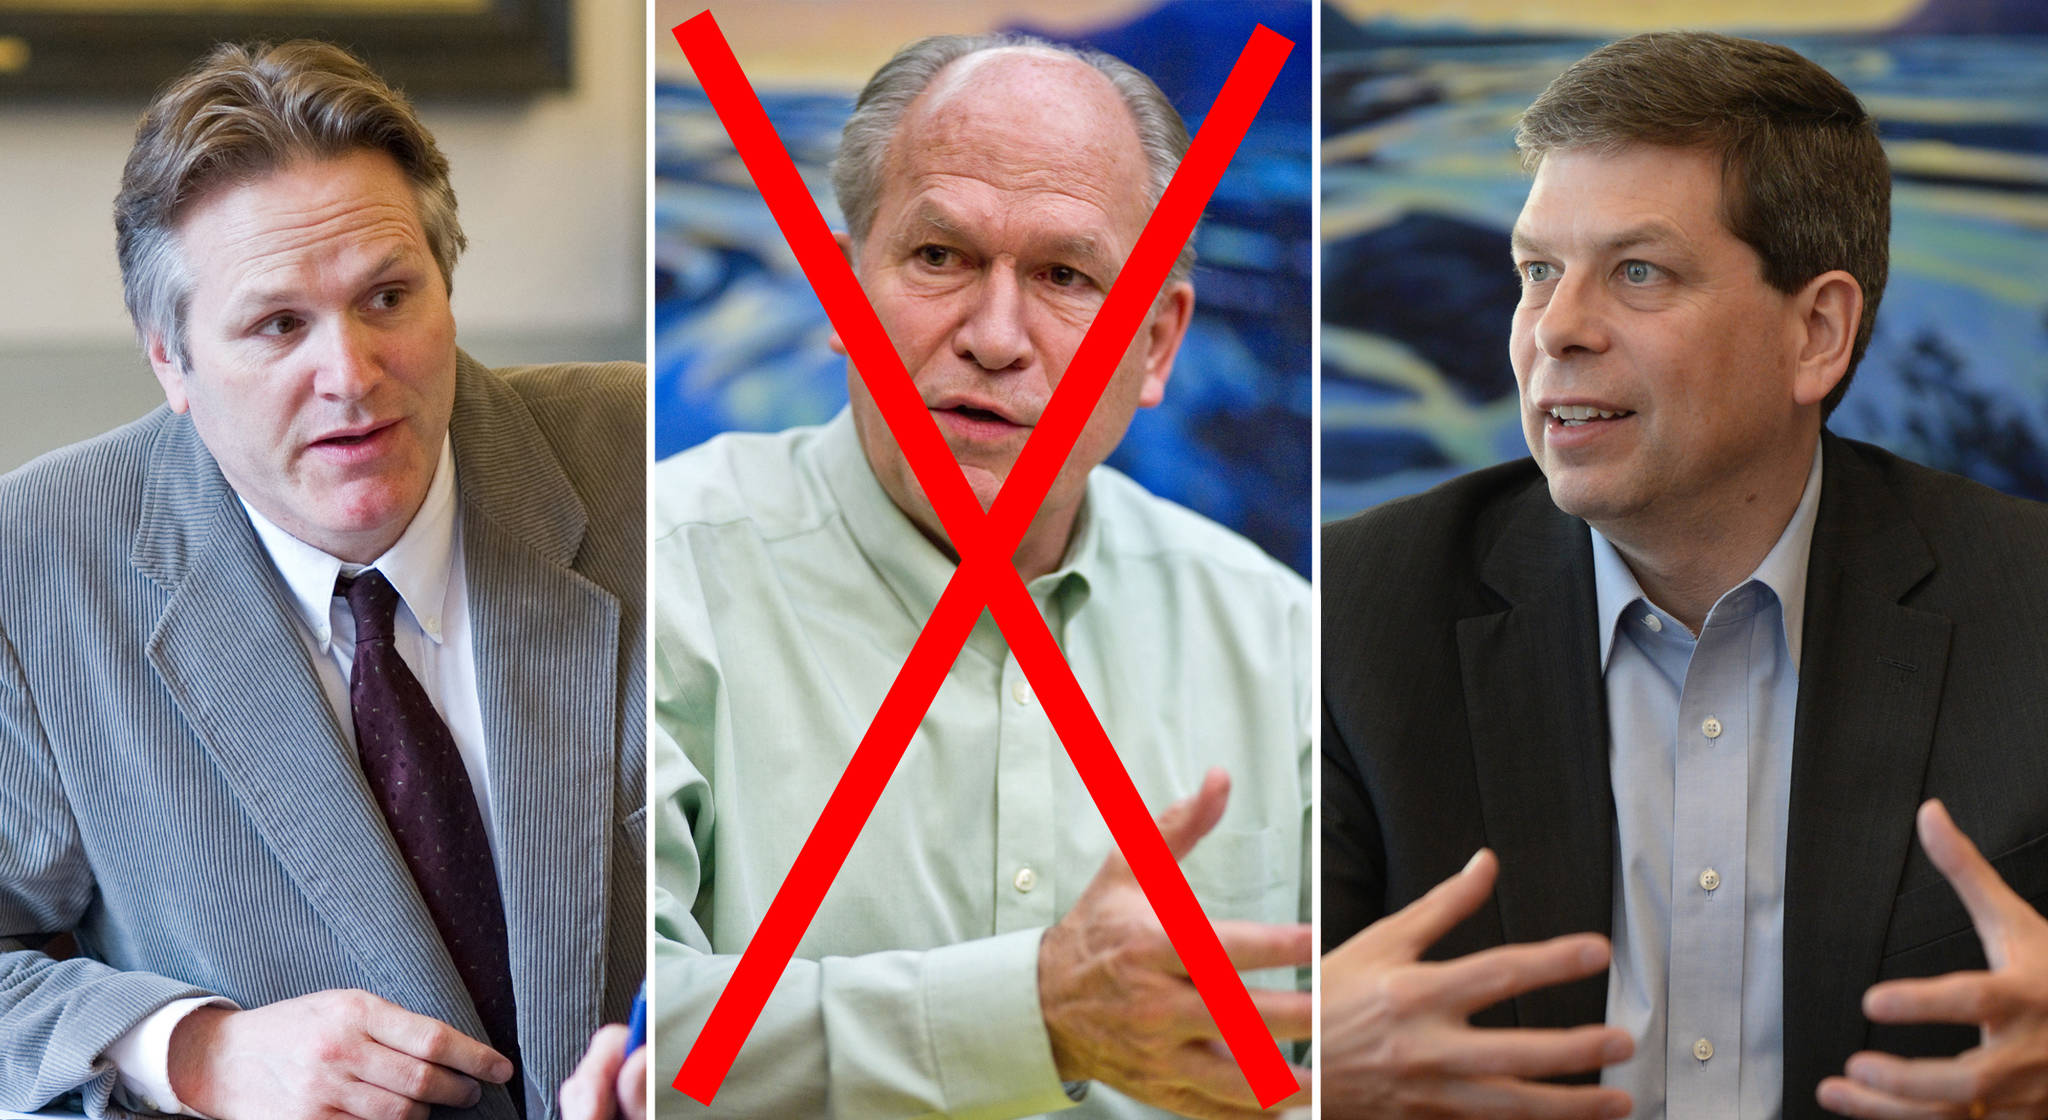 Gov. Bill Walker has withdrawn from the general election, he said Friday afternoon, Oct. 19, 2018. Republican candidate Mike Dunleavy, left, Democratic candidate Mark Begich, right, and Libertarian candidate Bily Toien (not pictured) remain in the race. (Composite image)